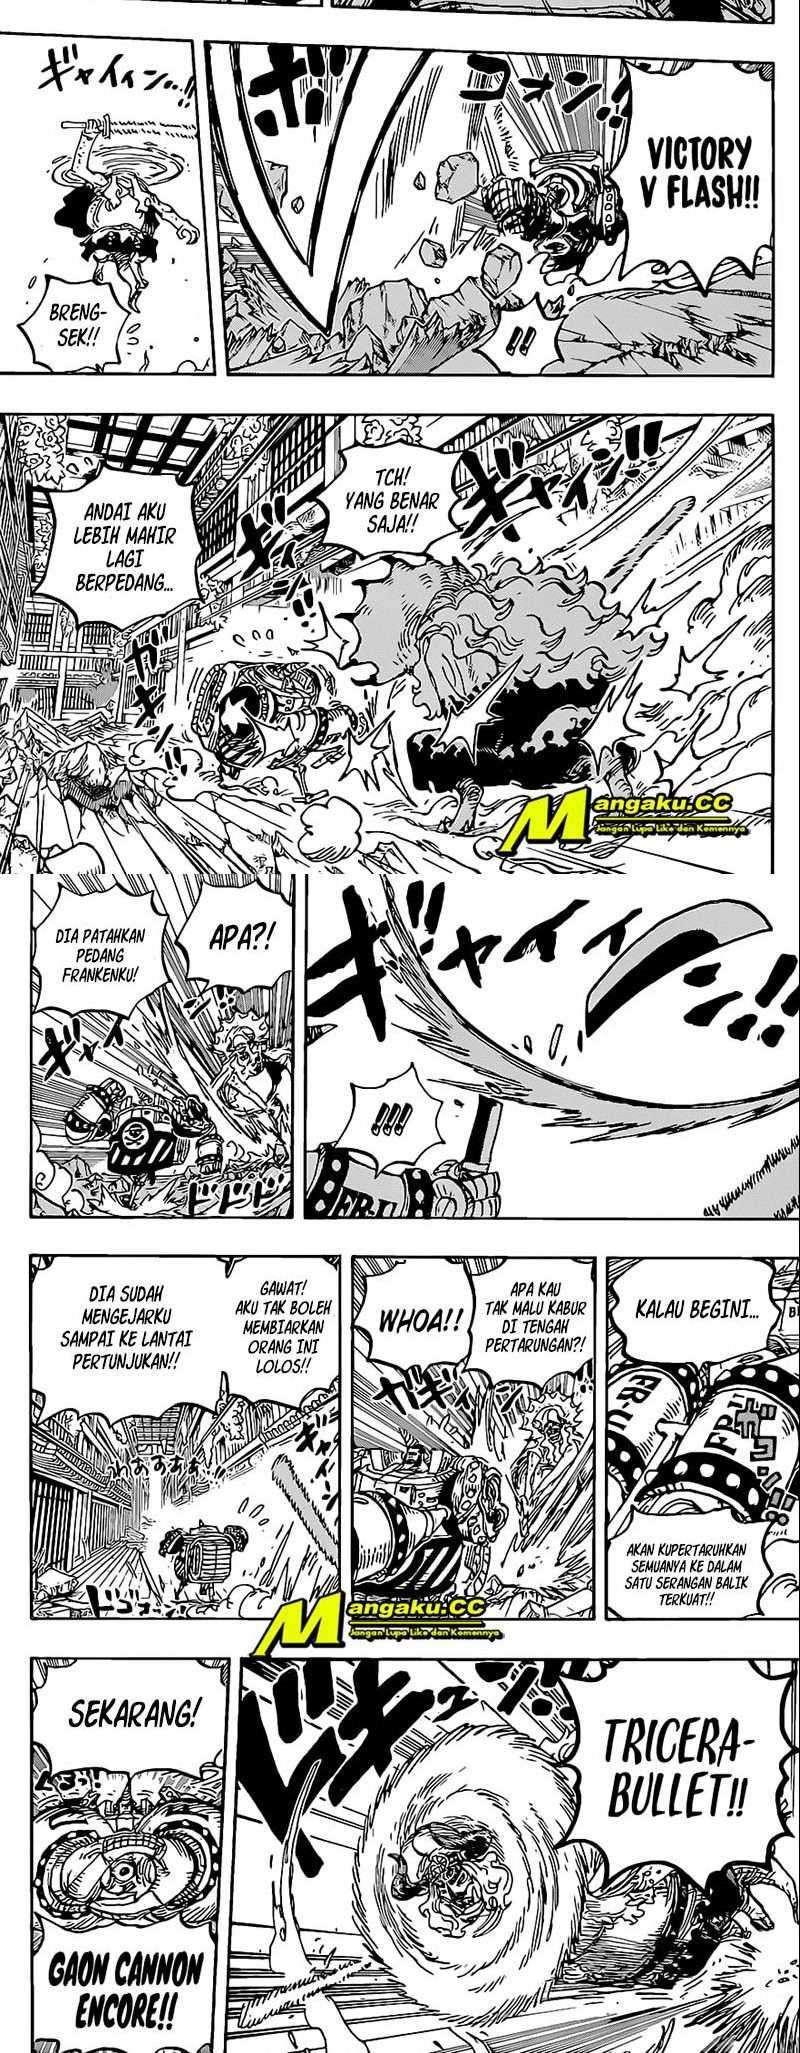 One Piece Chapter 1019 hq